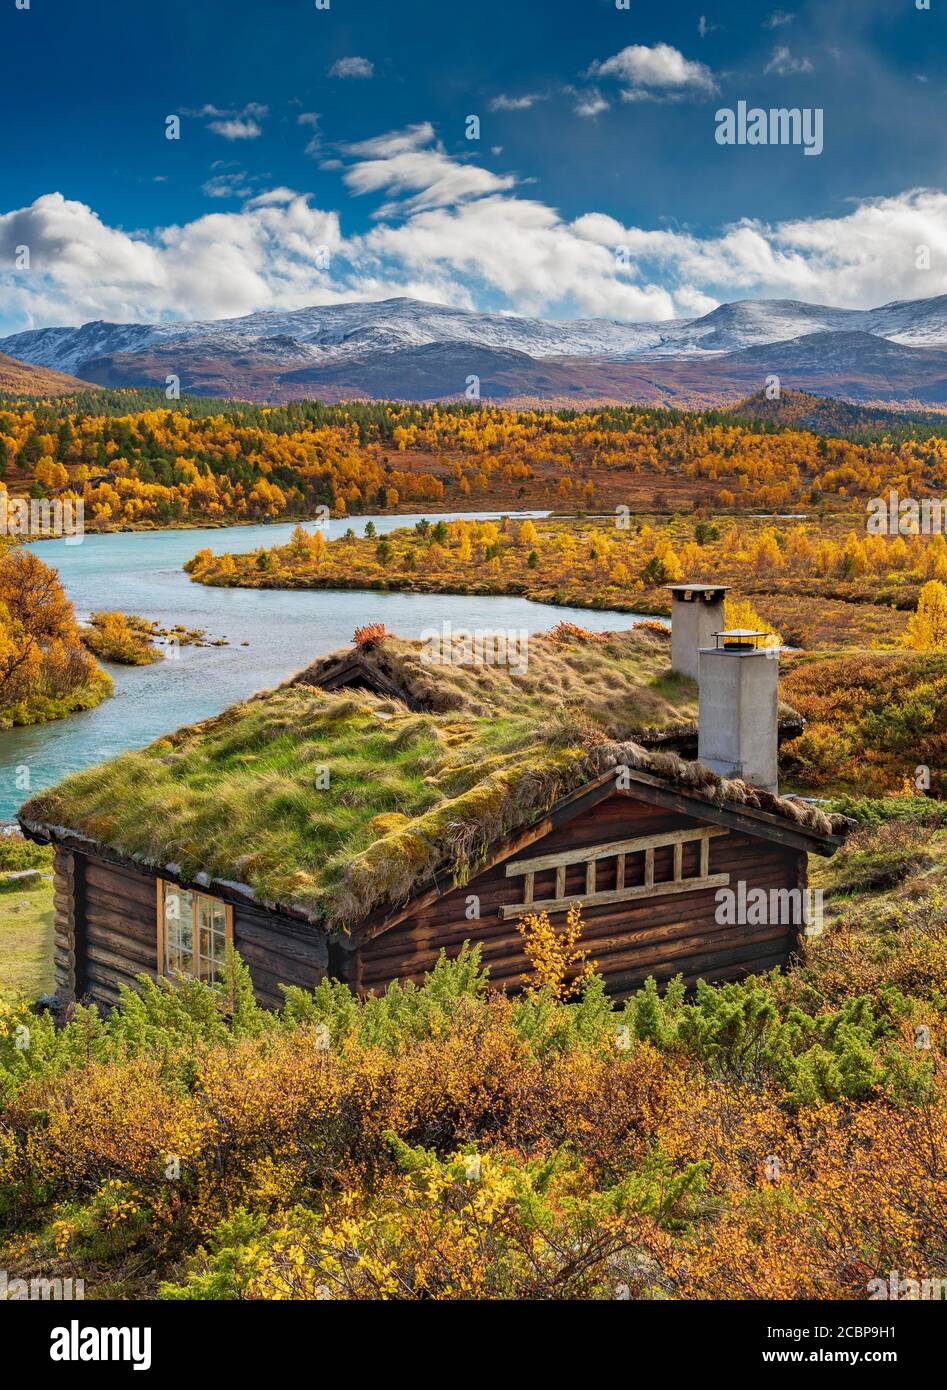 Wooden cabin, wide landscape, turquoise river, colorful vegetation and discolored trees in autumn, Ruska Aika, Indian Summer, Indian Summer, Indian Stock Photo